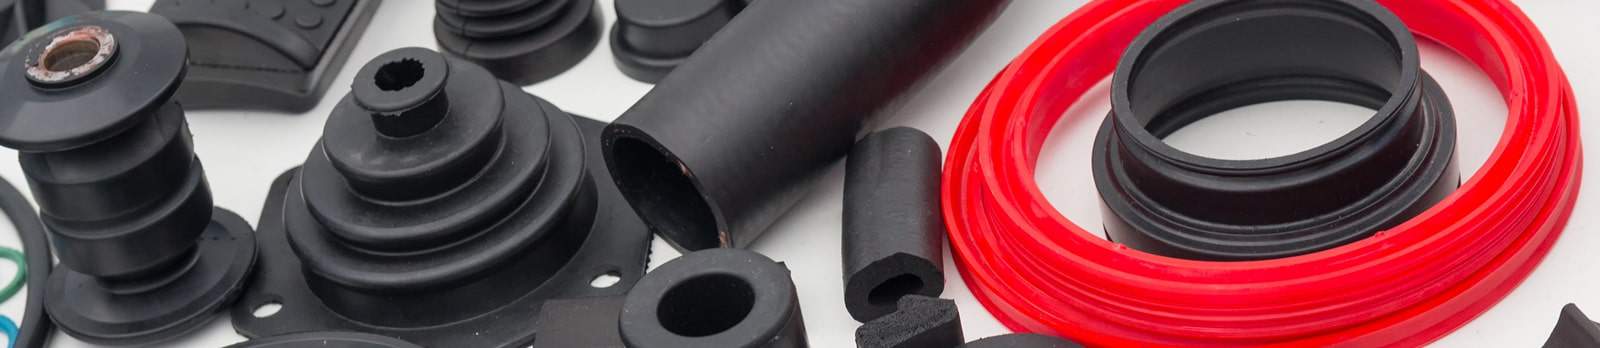 Reliable Suppliers Of High Quality Rubber Fabrications UK